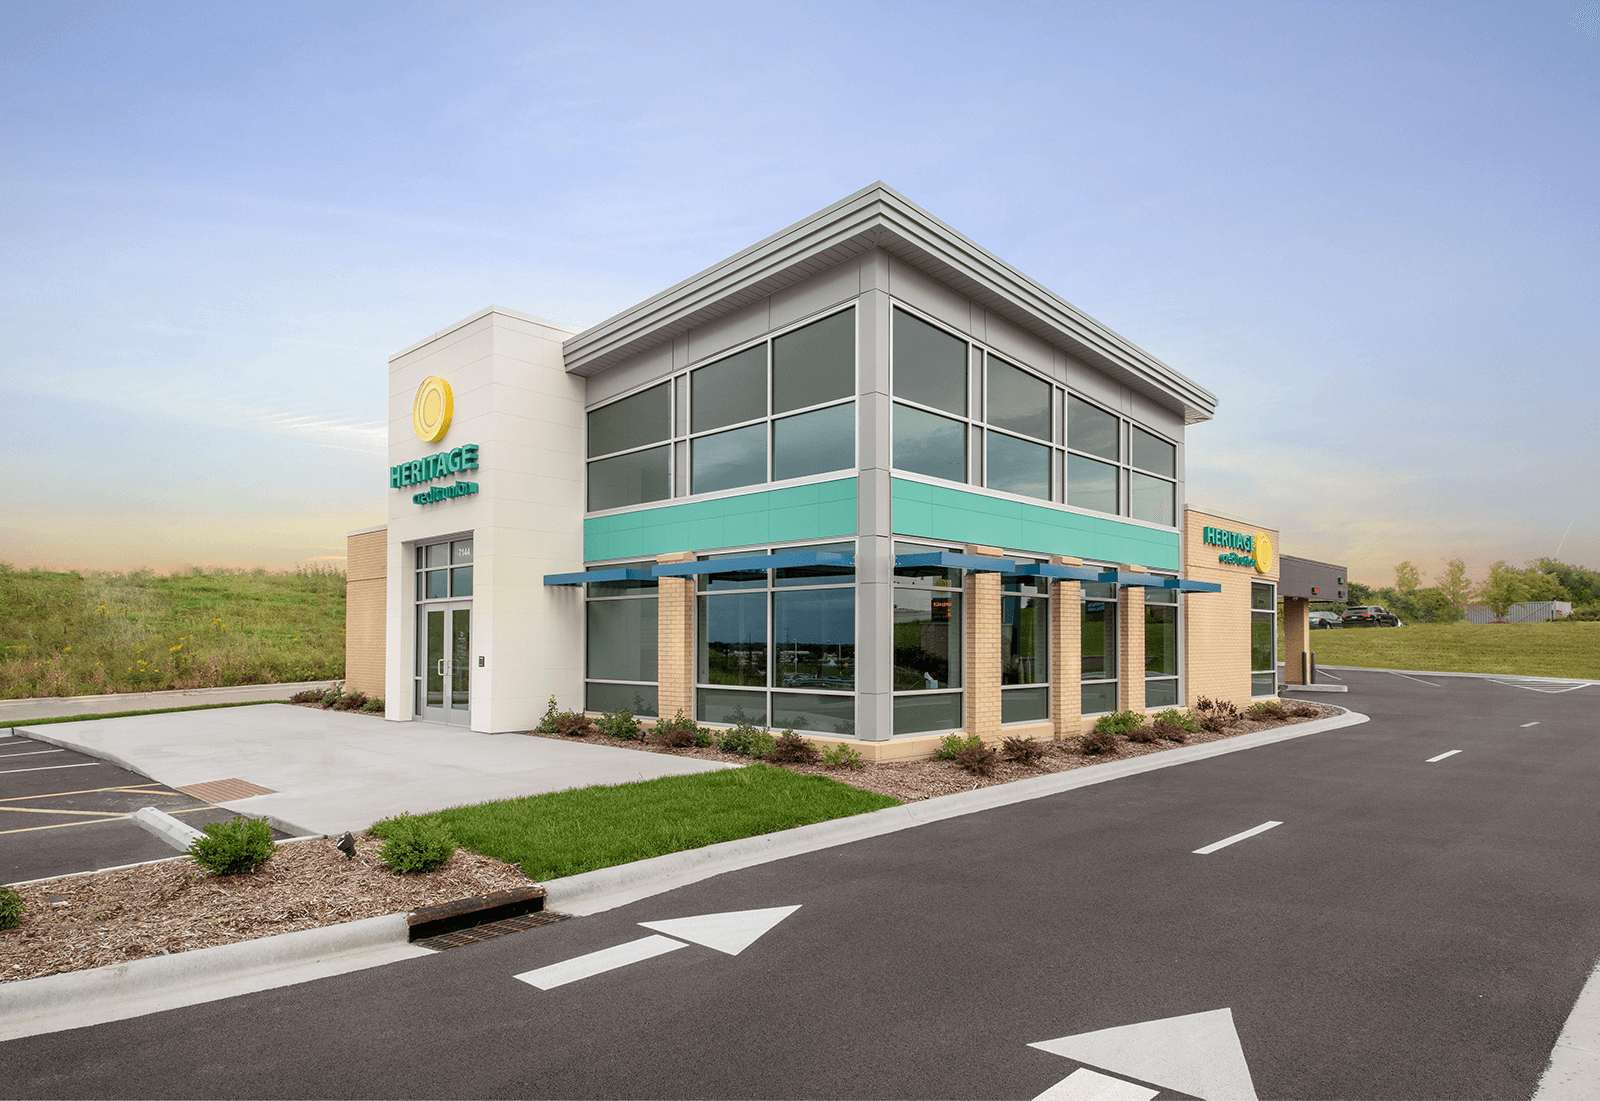 New credit union branch in Illinois